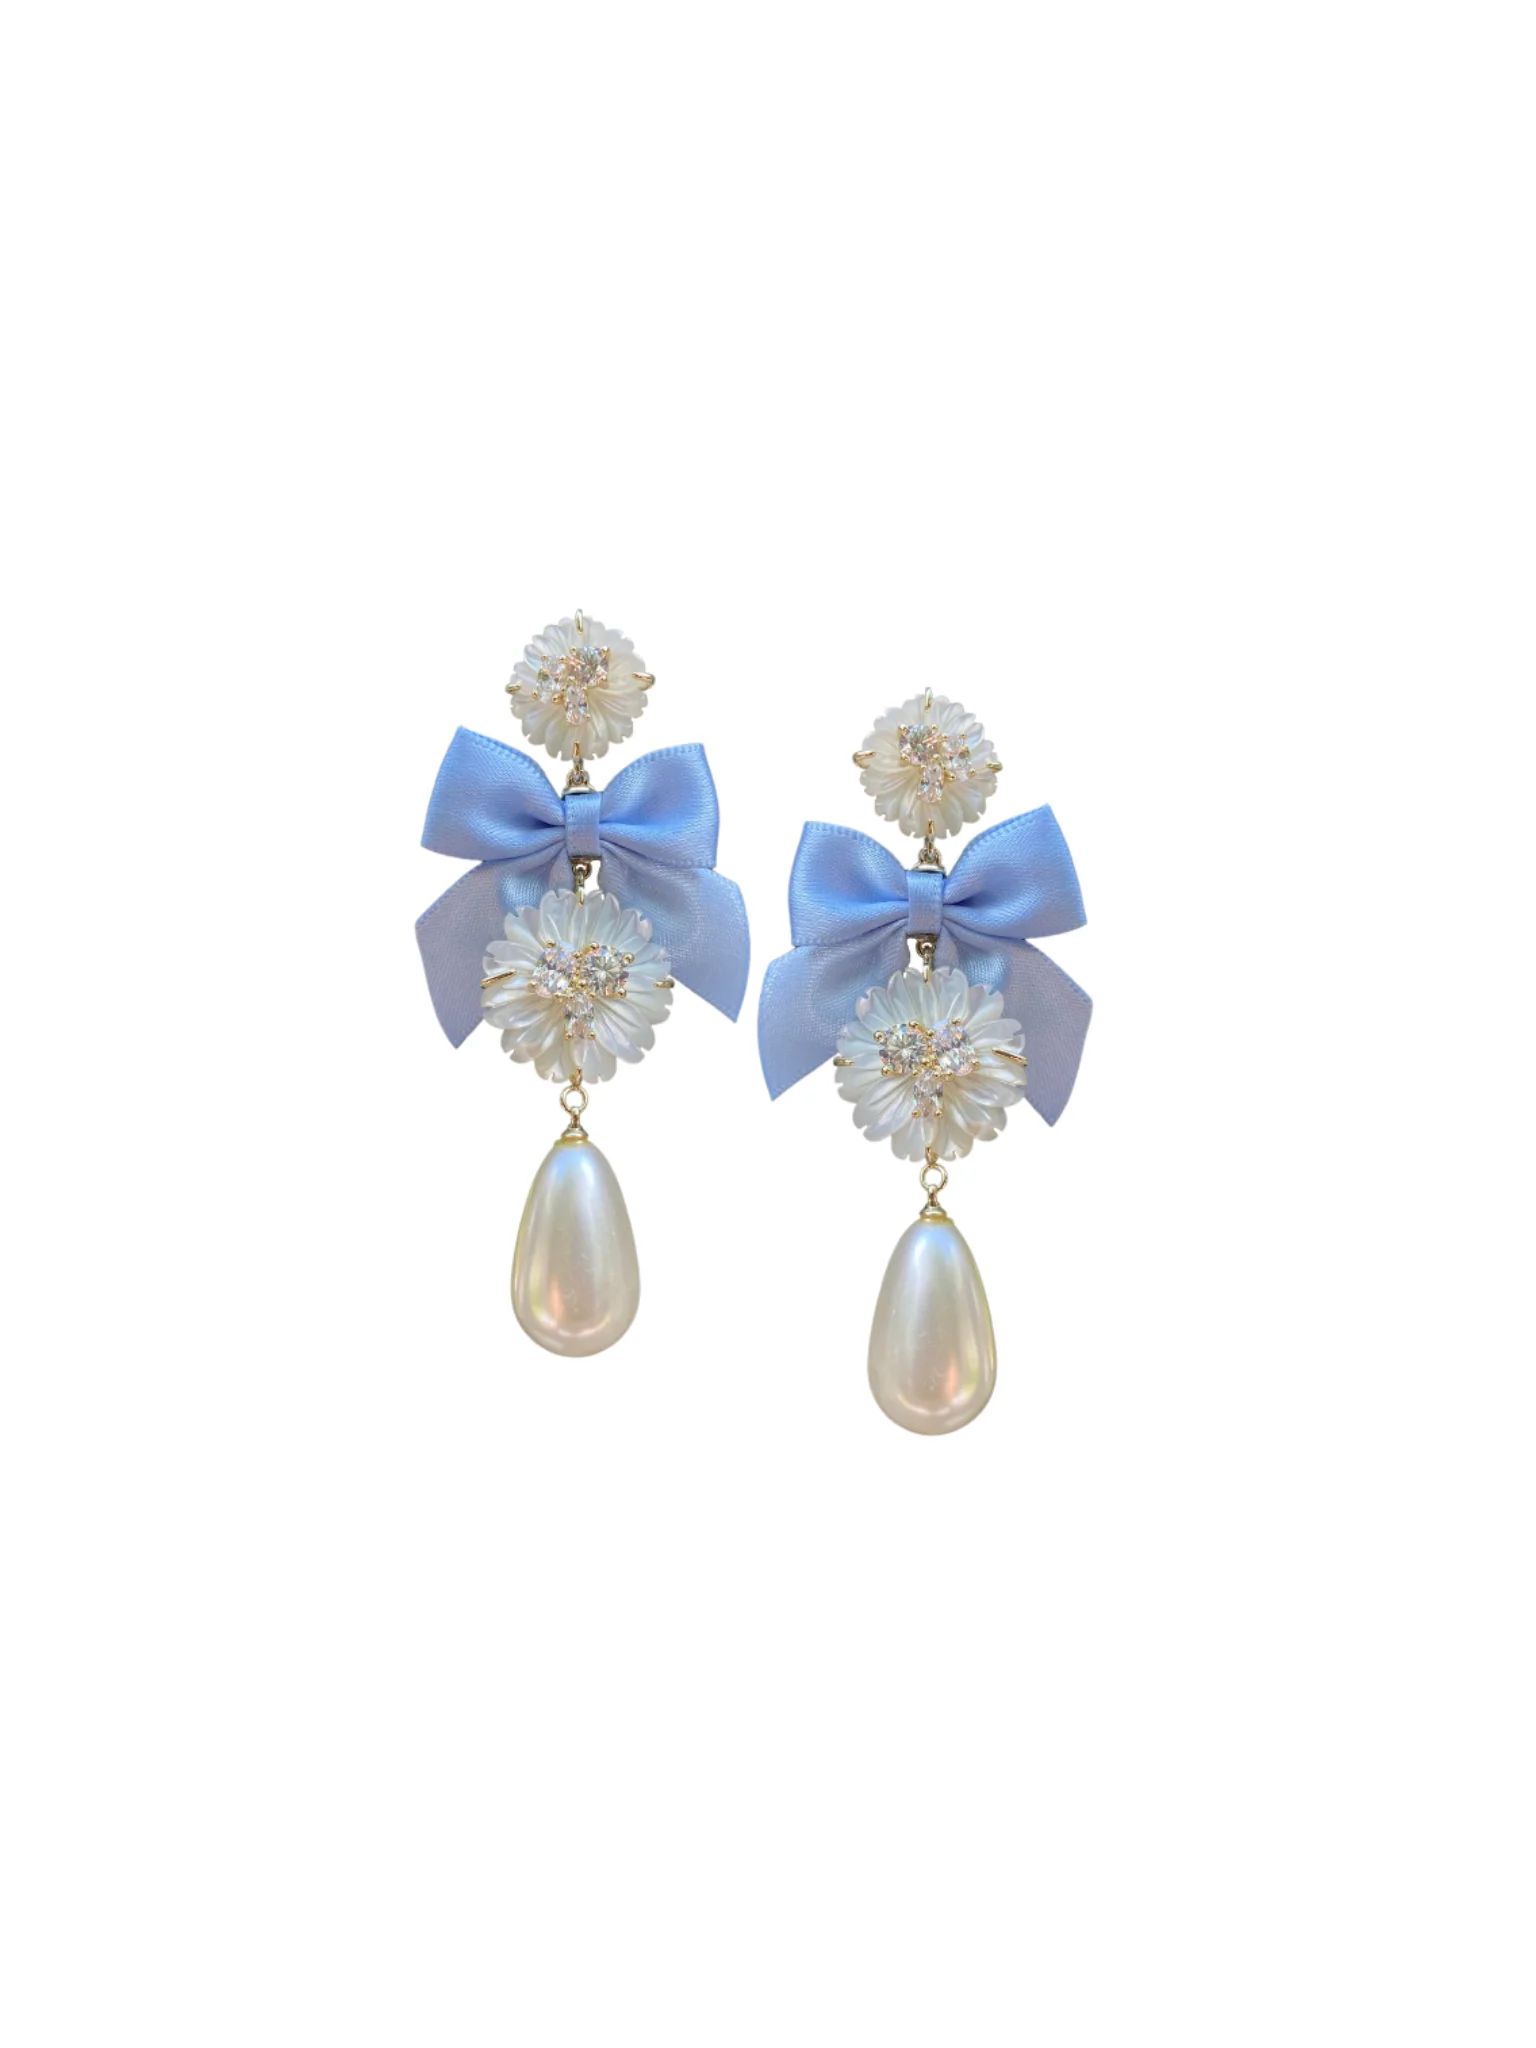 embellished mother of pearl + cornflower blue bow | Nicola Bathie Jewelry